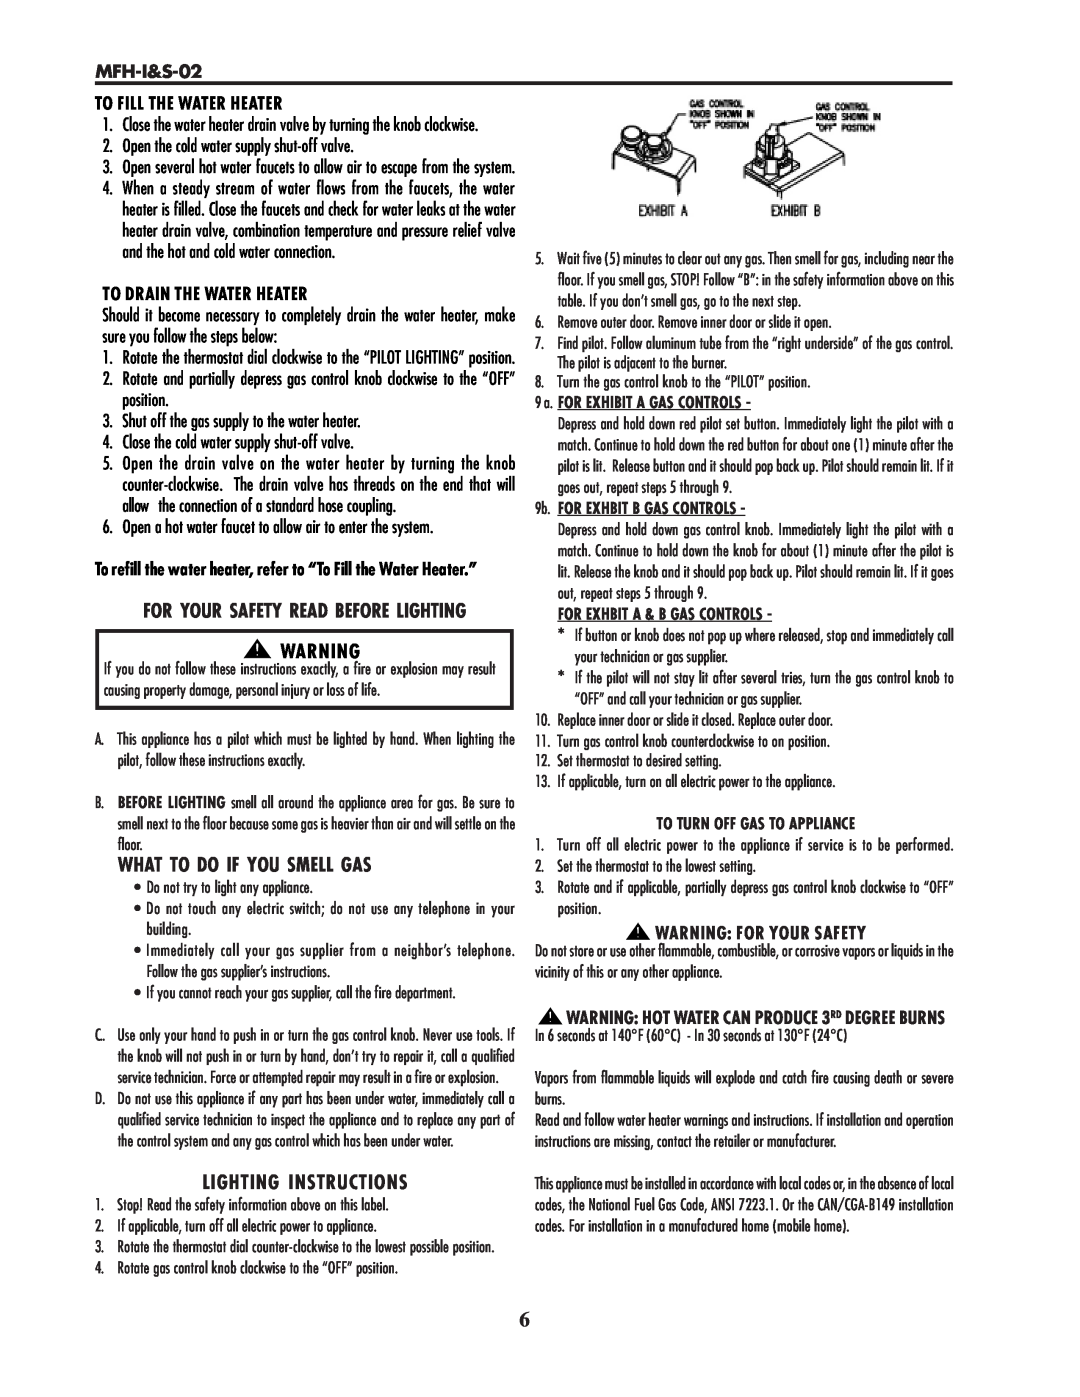 Lochinvar MFH-I&S-02 service manual What To Do If You Smell Gas, Lighting Instructions, To Drain The Water Heater 